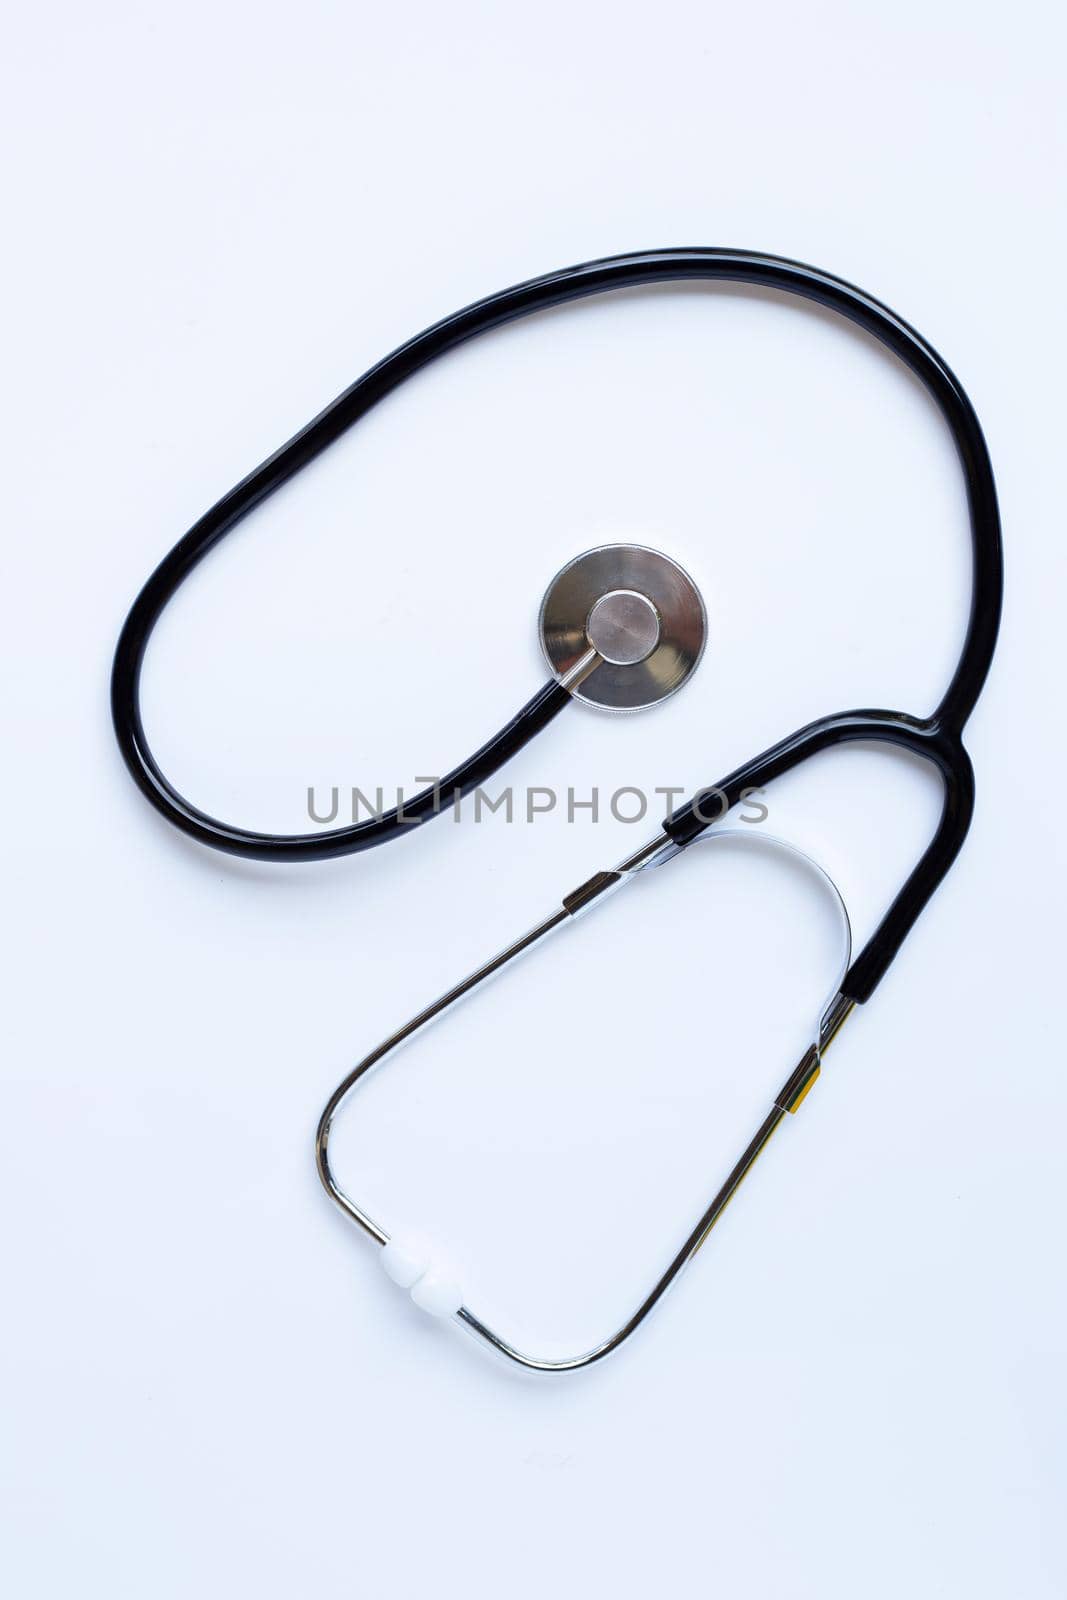 Stethoscope on white background. copy space